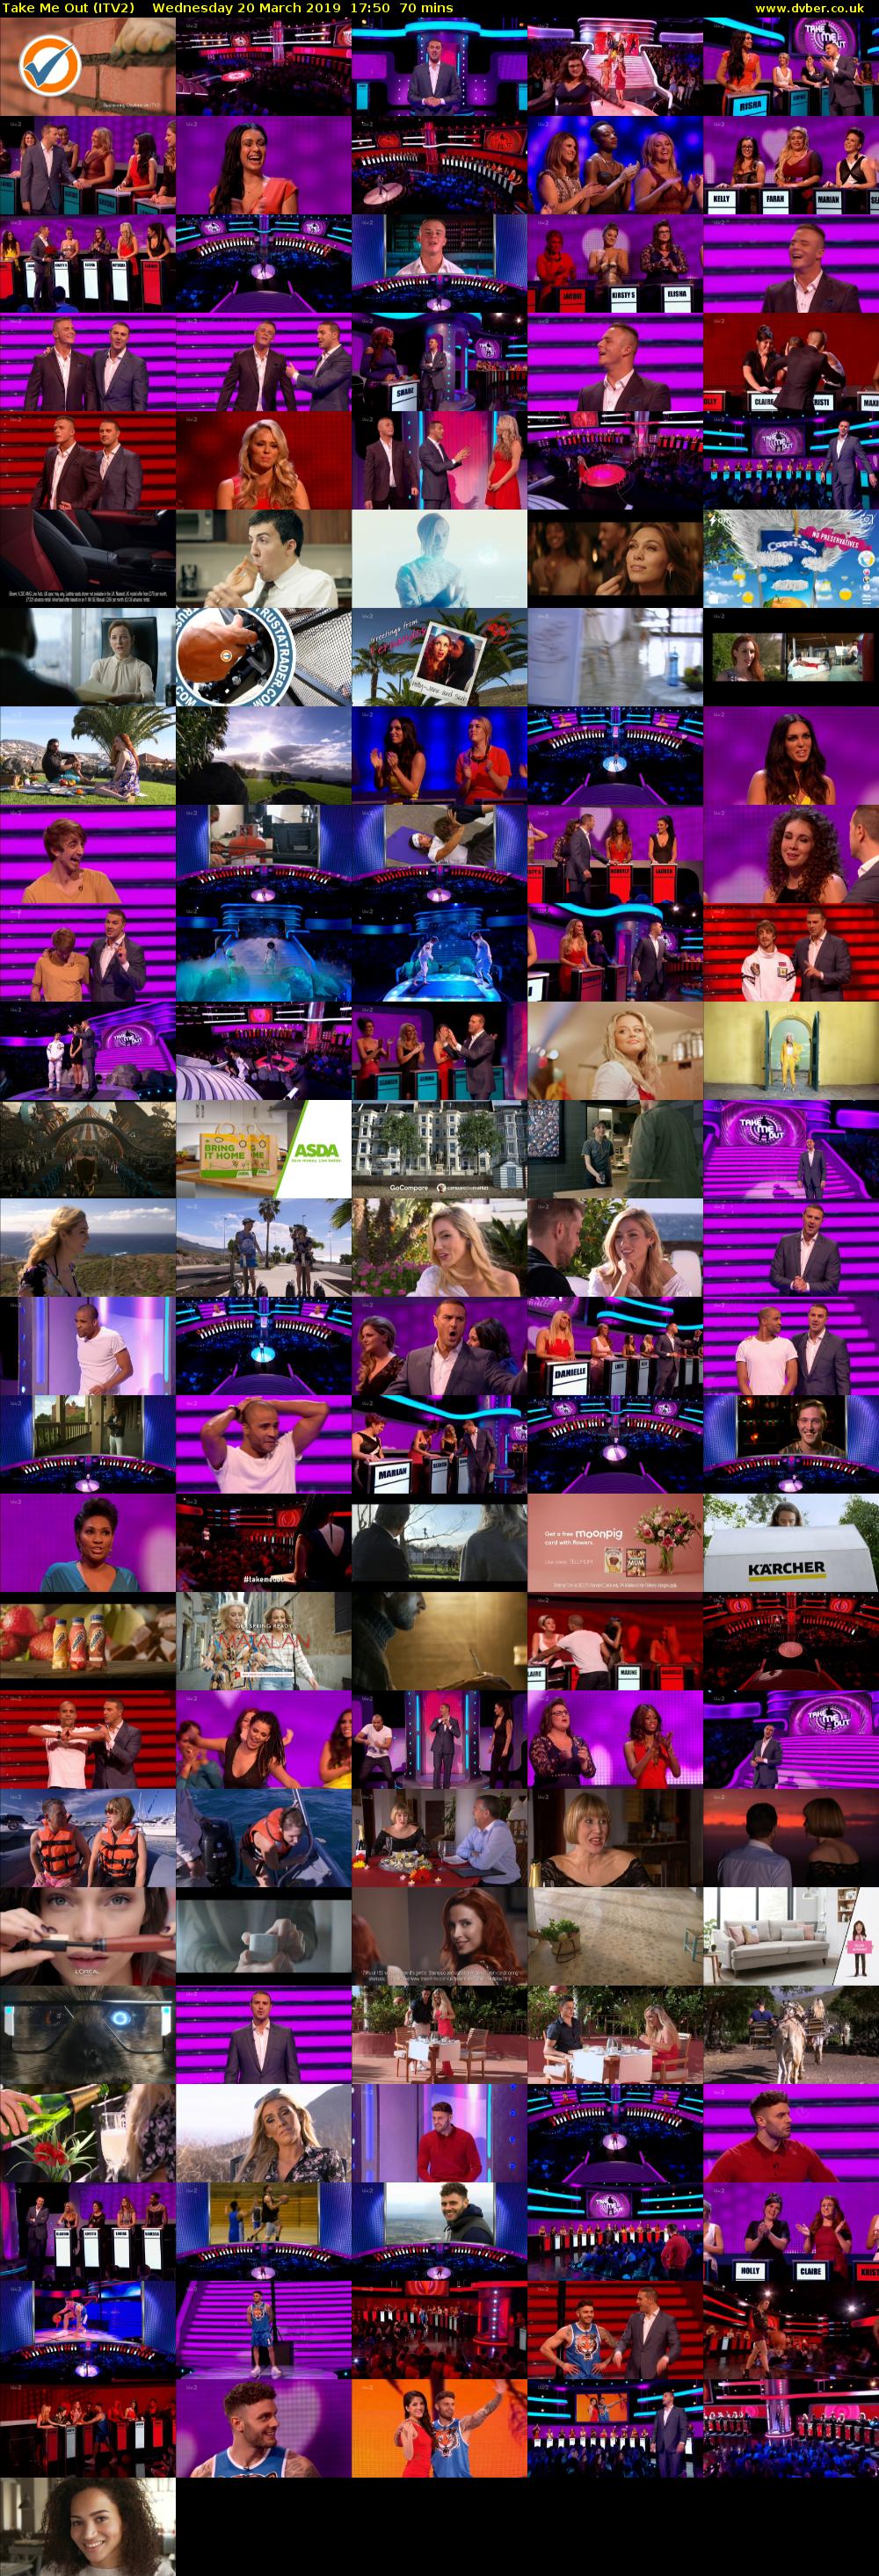 Take Me Out (ITV2) Wednesday 20 March 2019 17:50 - 19:00